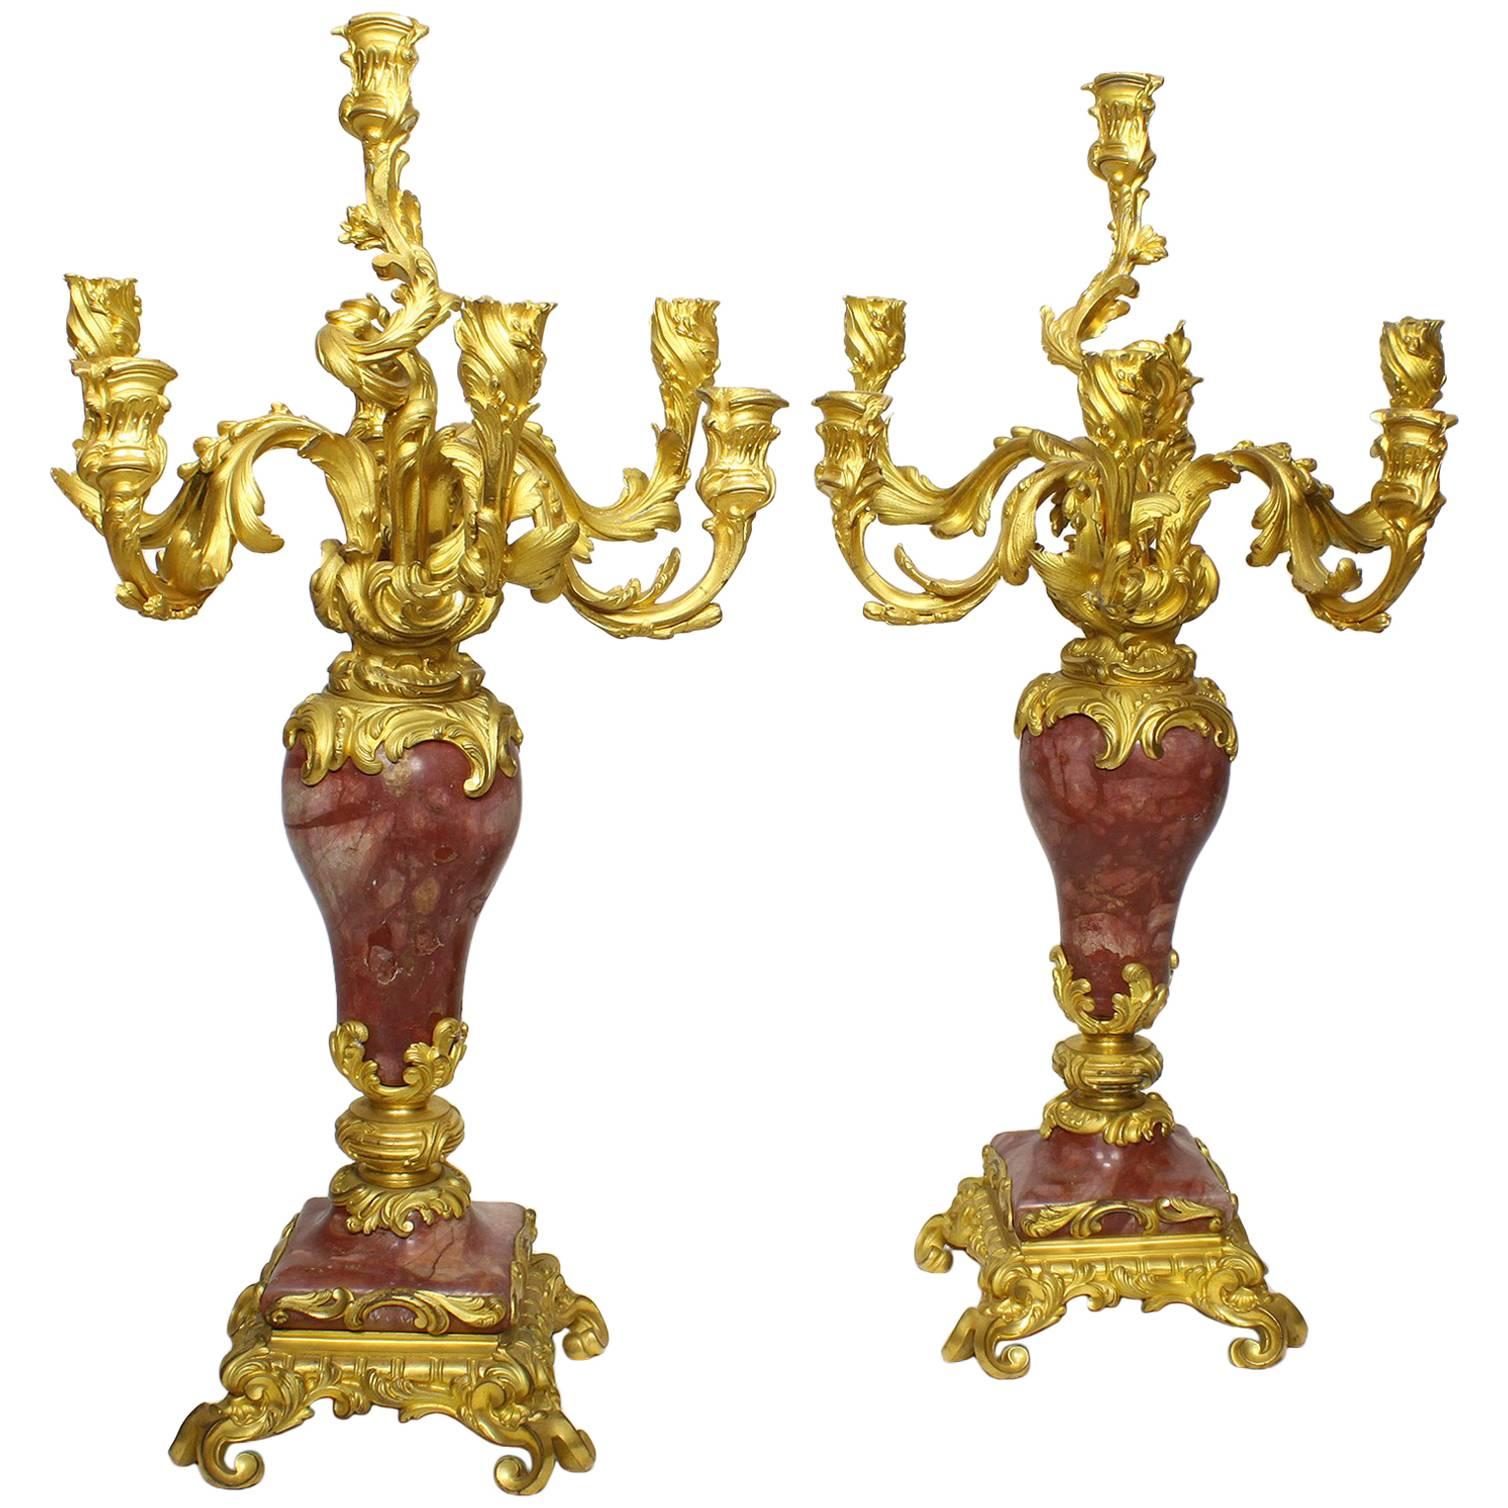 Pair of French 19th Century Louis XV Style Gilt-Bronze & Rouge Royal Candelabra